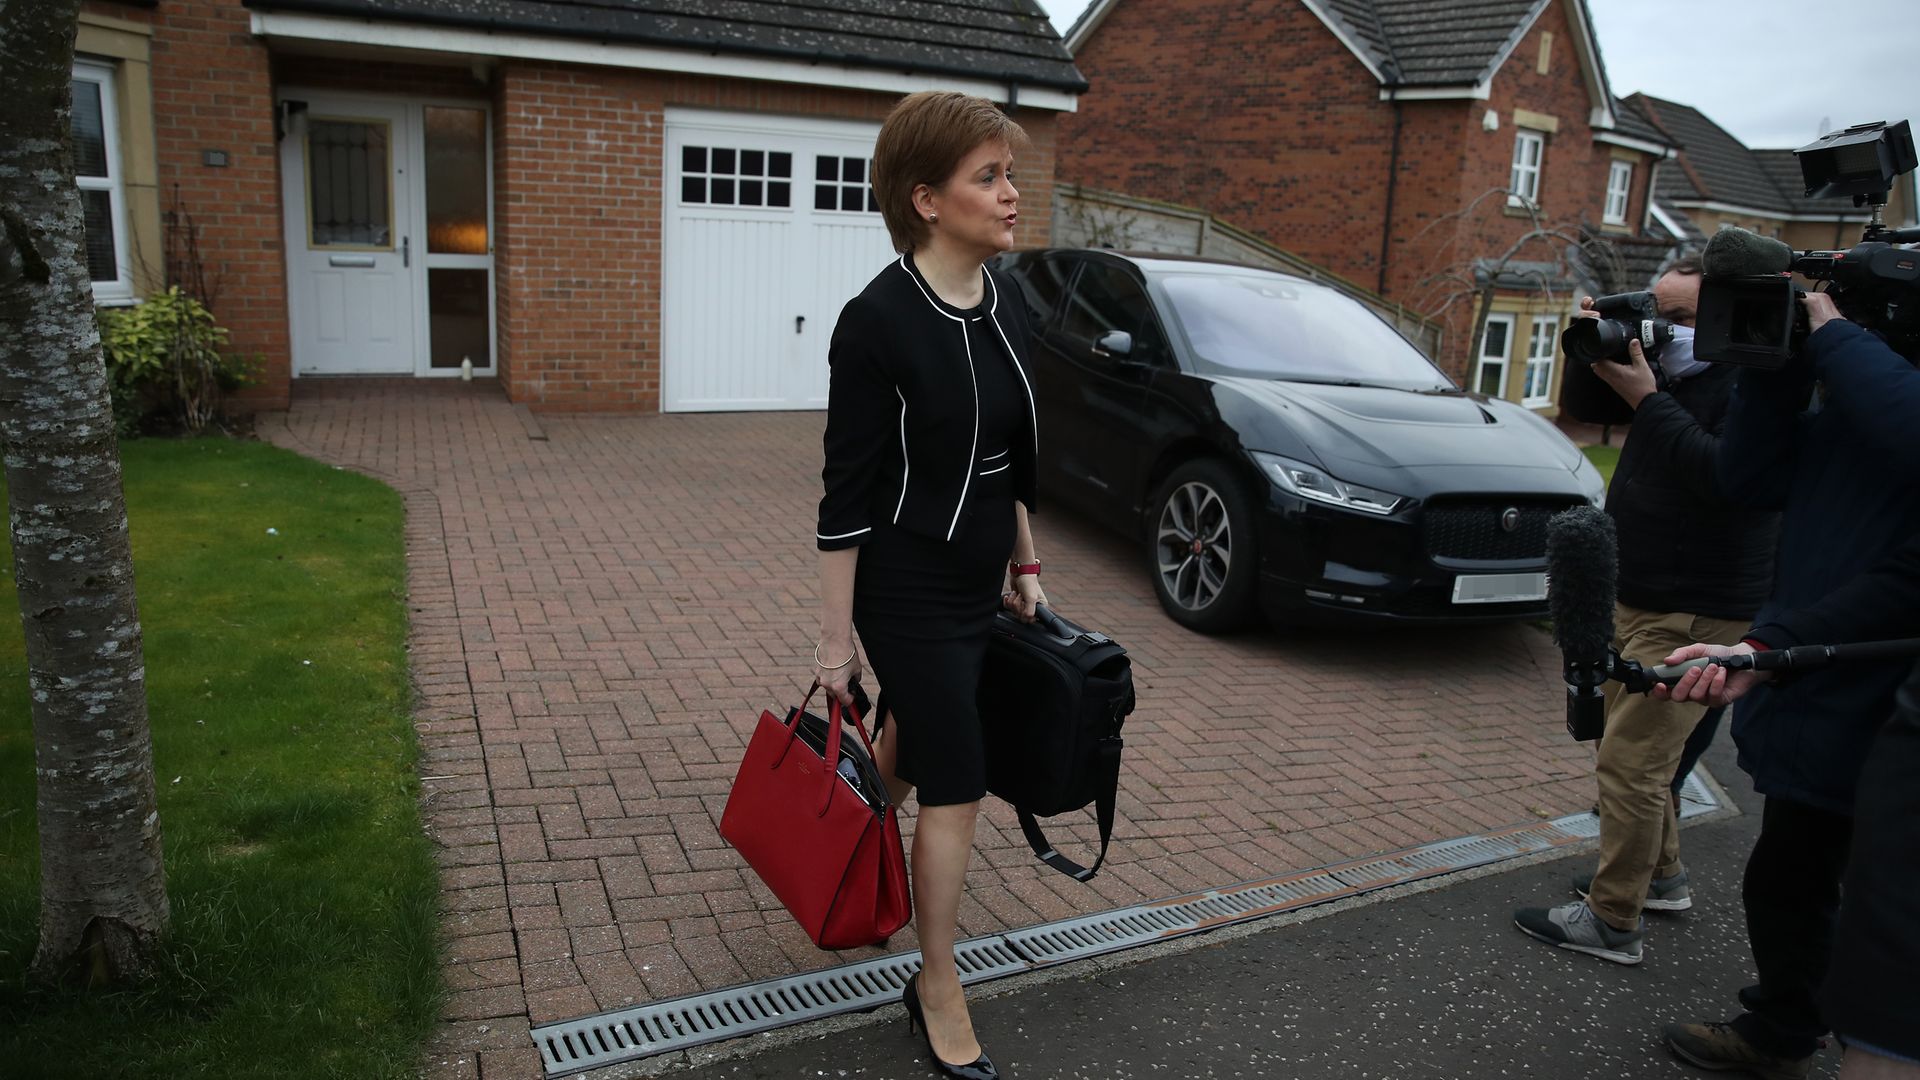 First Minister of Scotland, Nicola Sturgeon, leaves her home in Glasgow - Credit: PA